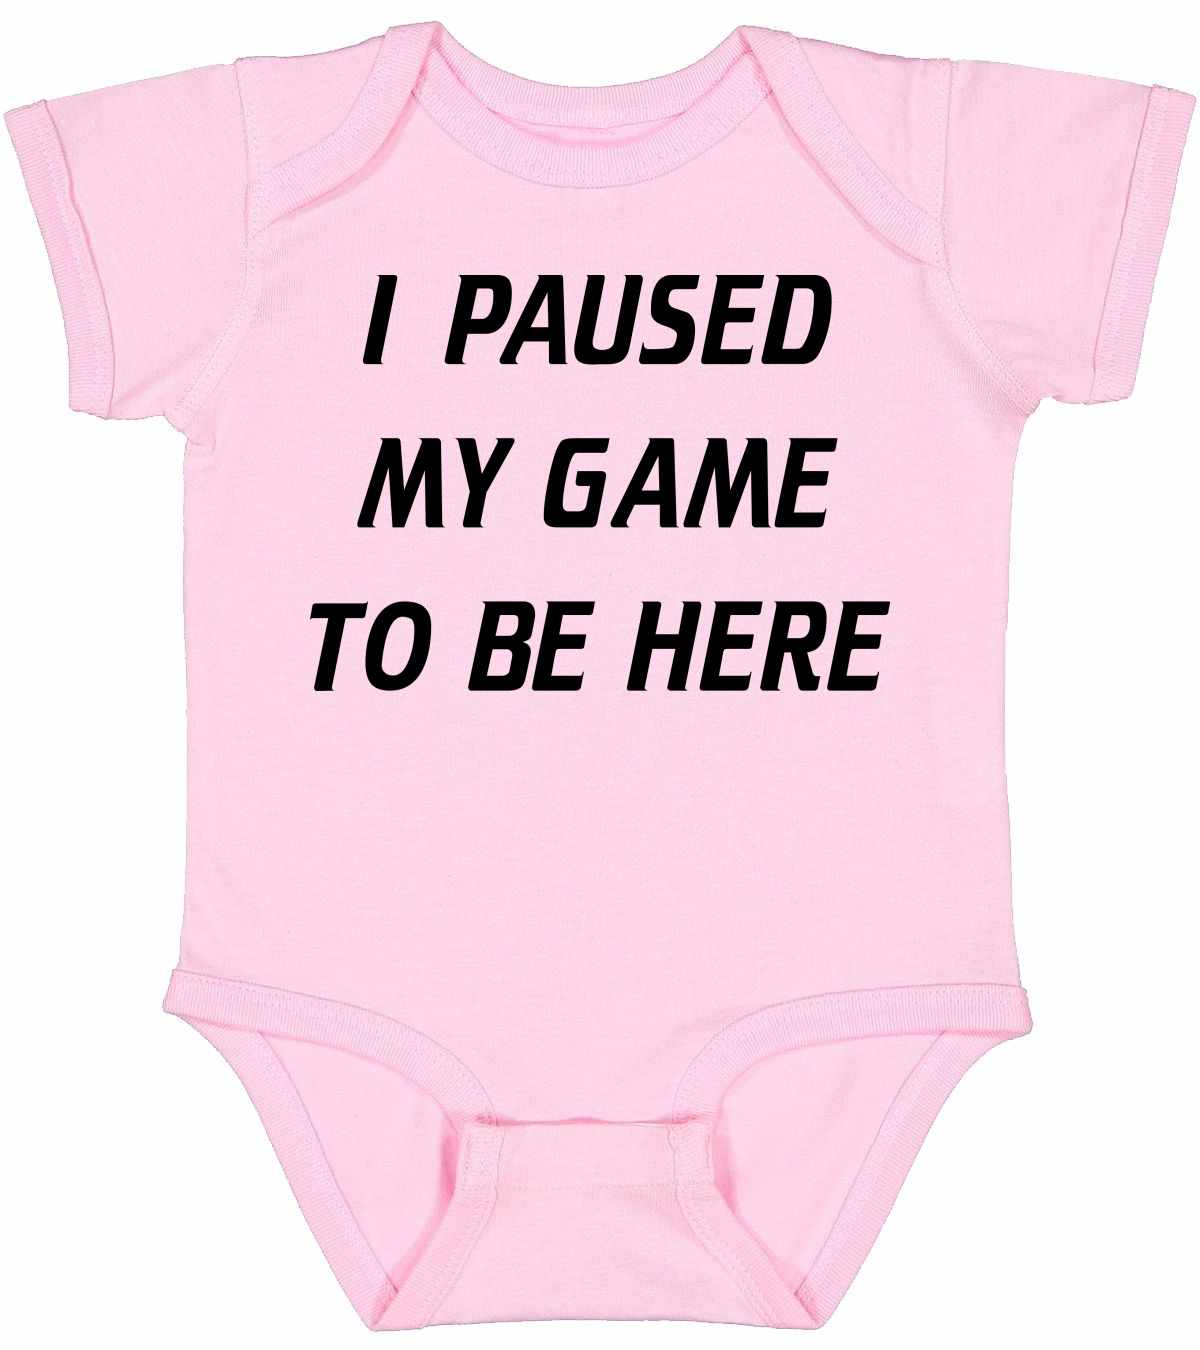 I Paused My Game to Be Here Infant BodySuit (#970-10)